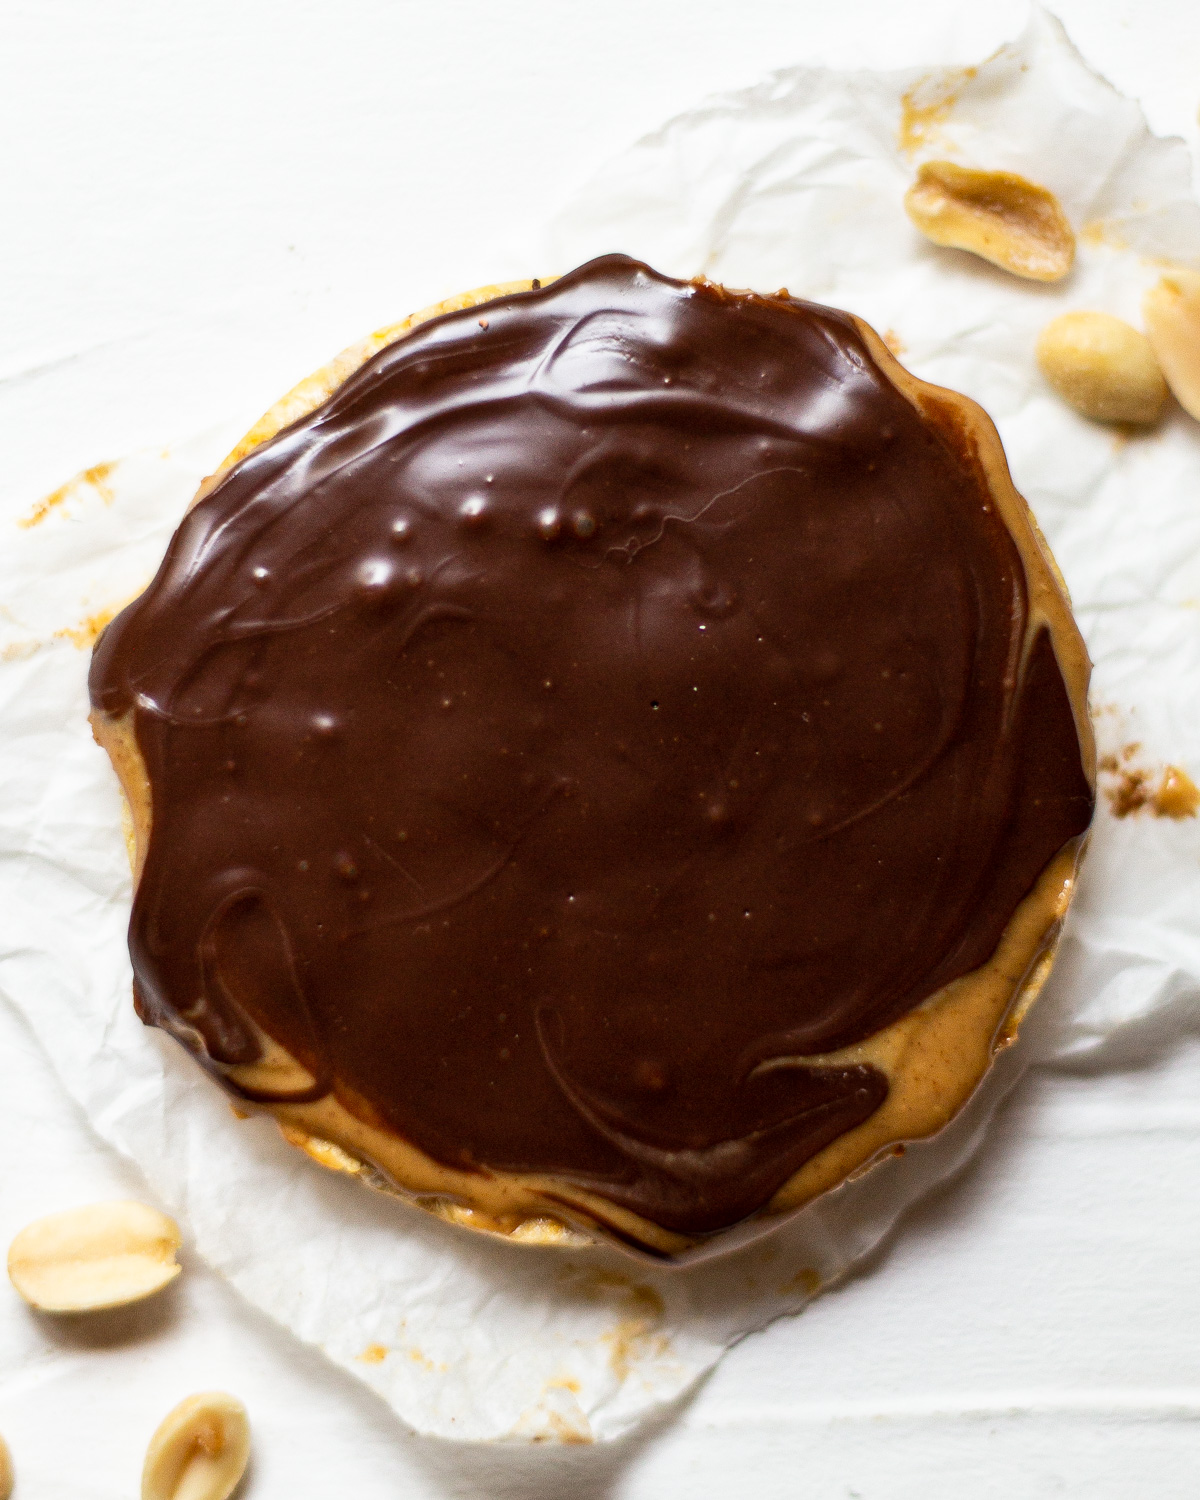 A rice cake, topped with creamy peanut butter and melted chocolate.